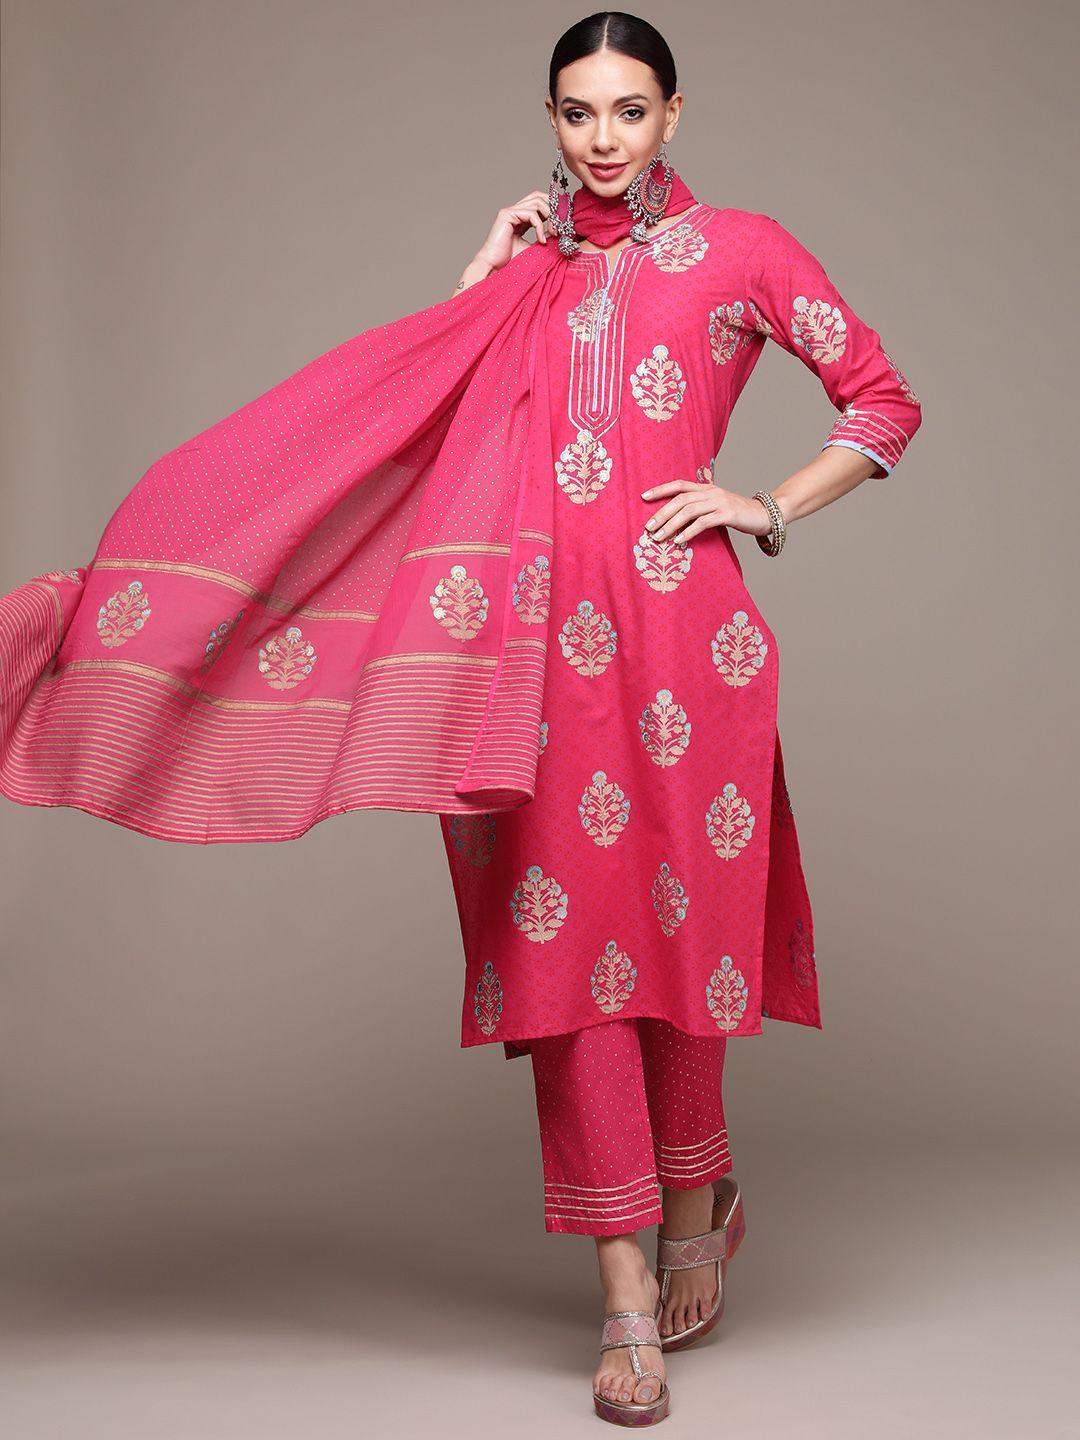 anubhutee women pink floral printed pure cotton kurta with trousers & with dupatta